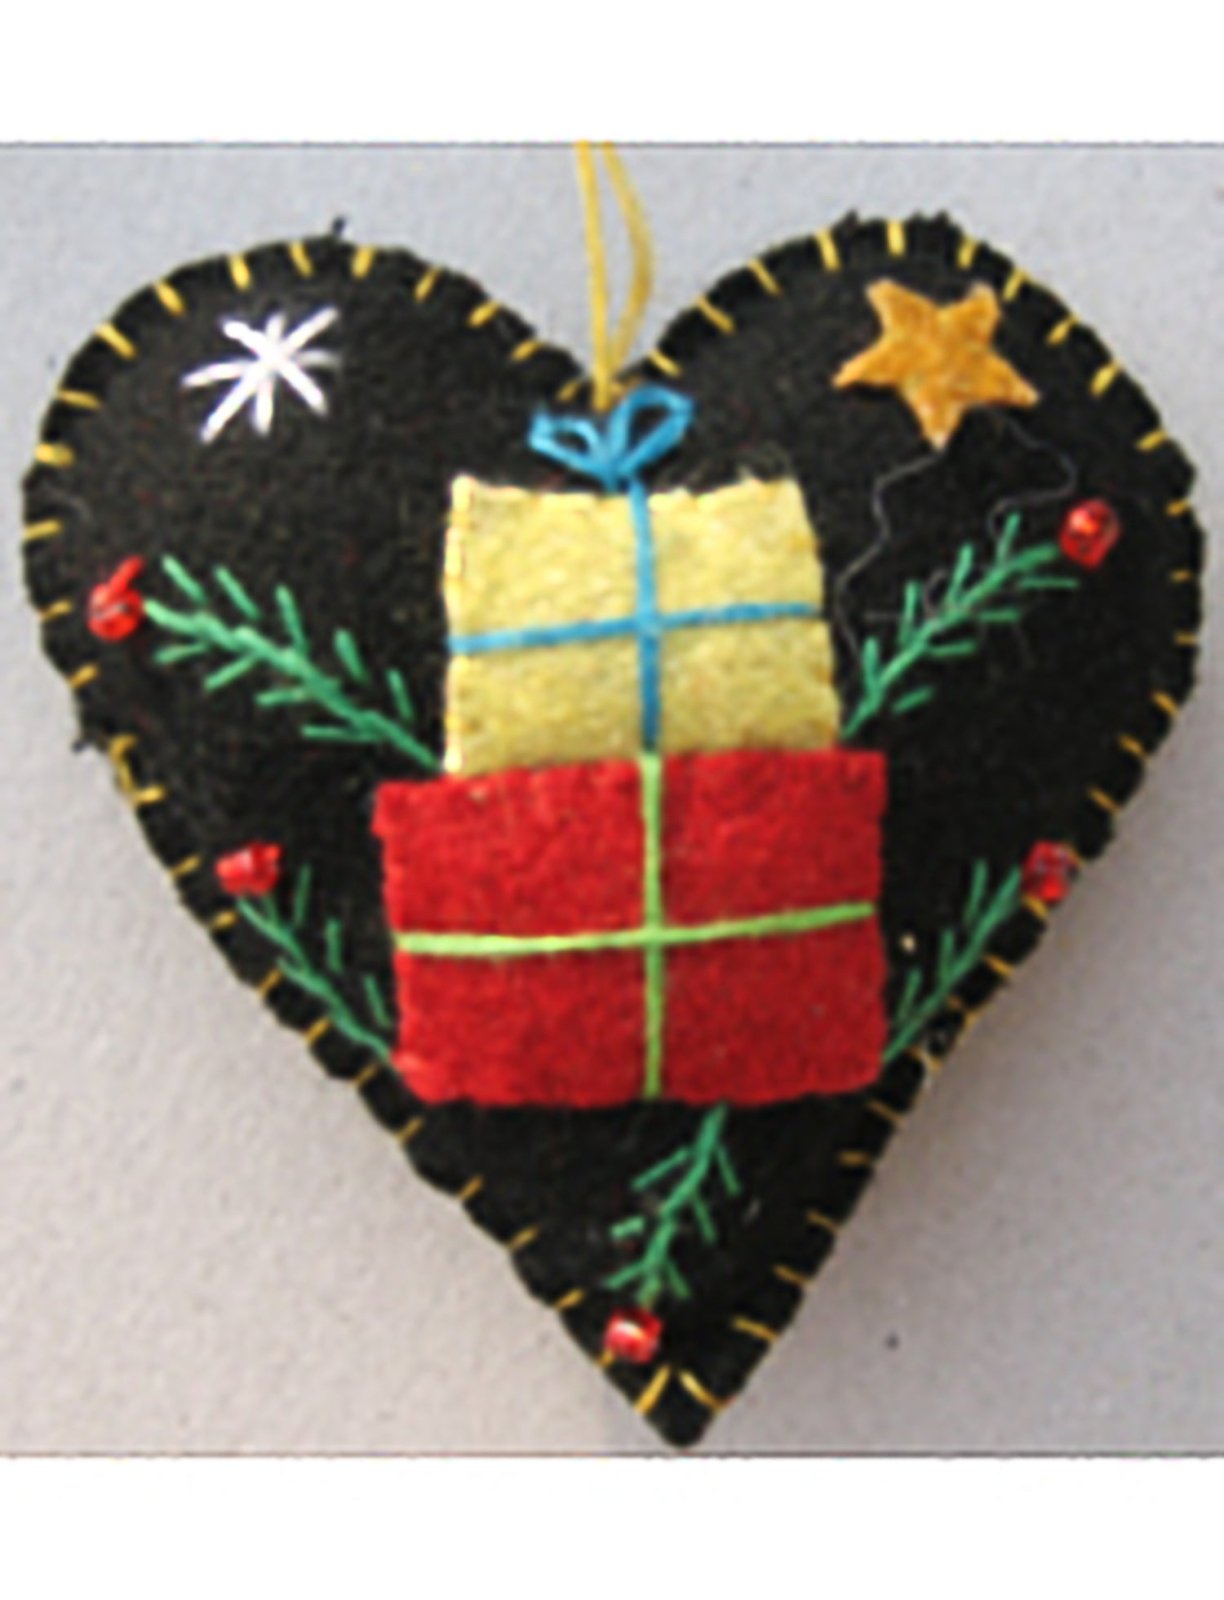 Primitive Handcrafted Christmas Applique w/ Beading Ornament Stocking /Mittens - The Primitive Pineapple Collection